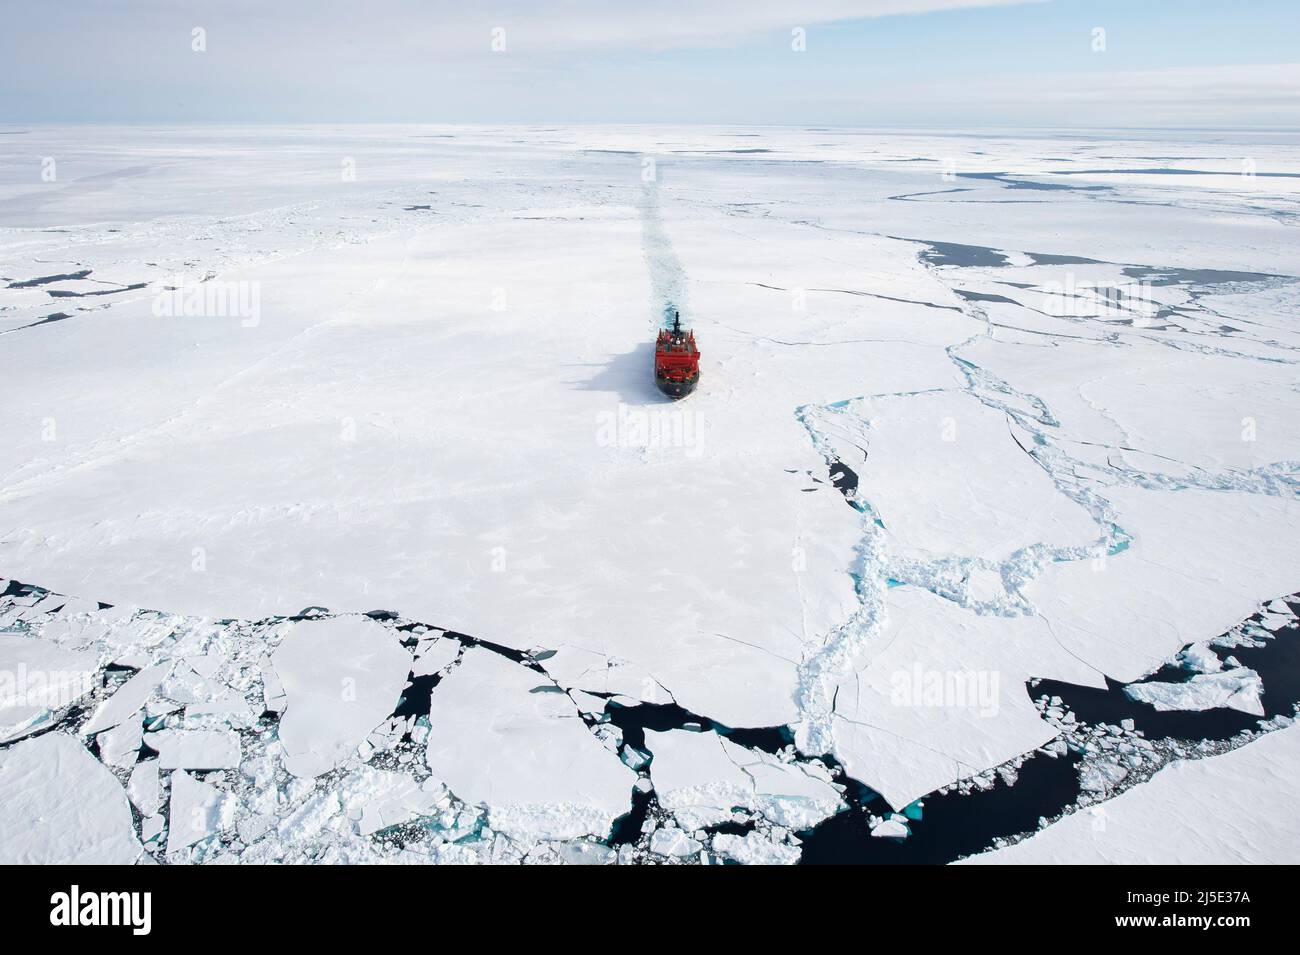 Nuclear Icebreaker breaking the ice in arctic waters Stock Photo